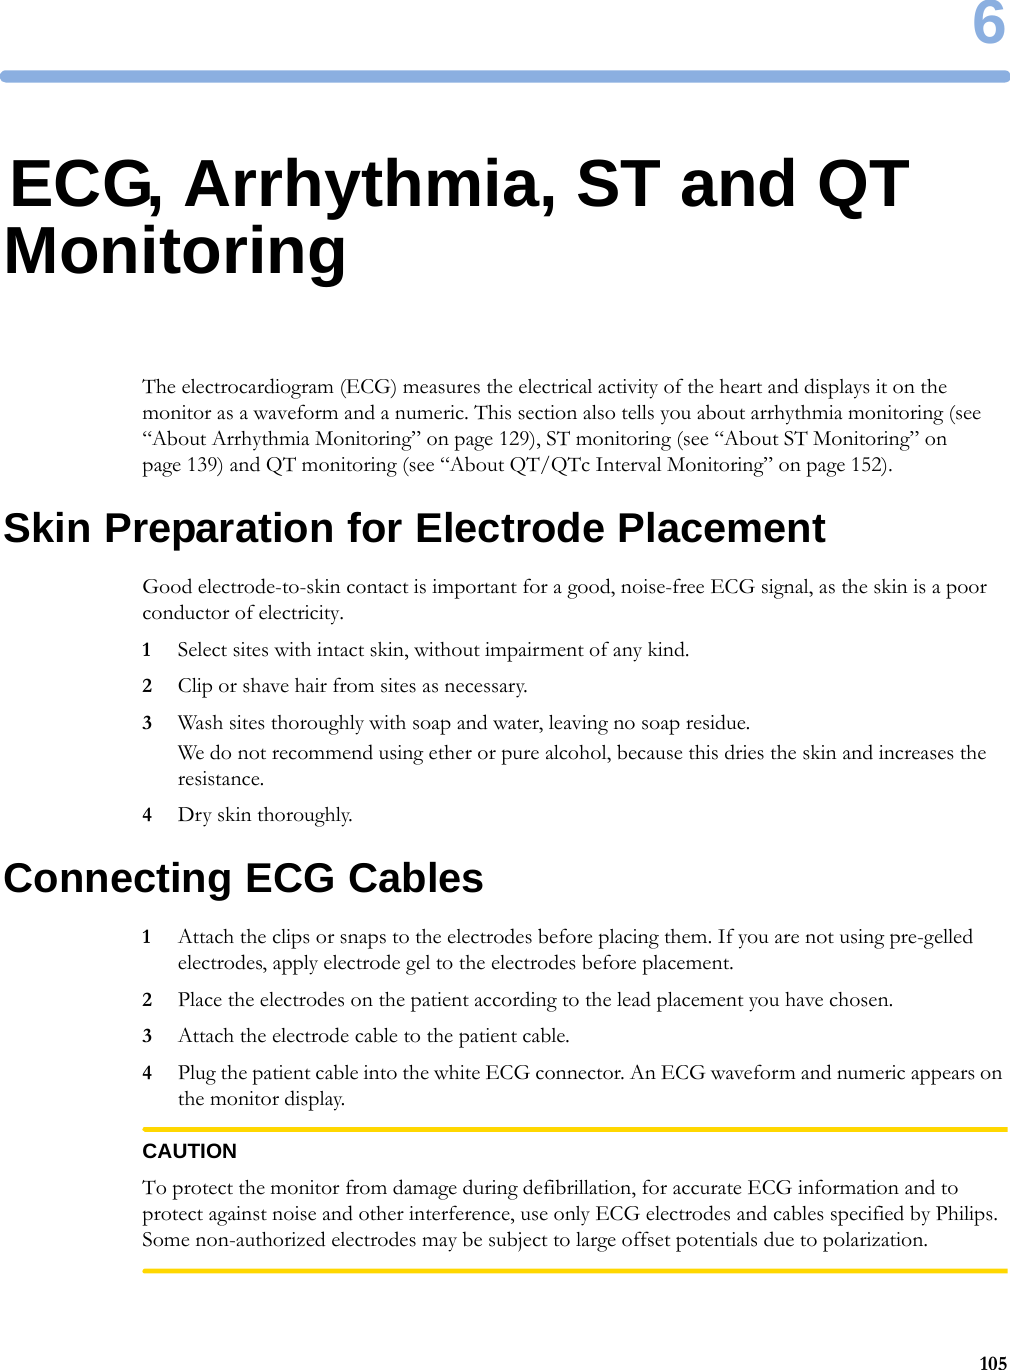 61056ECG, Arrhythmia, ST and QT MonitoringThe electrocardiogram (ECG) measures the electrical activity of the heart and displays it on the monitor as a waveform and a numeric. This section also tells you about arrhythmia monitoring (see “About Arrhythmia Monitoring” on page 129), ST monitoring (see “About ST Monitoring” on page 139) and QT monitoring (see “About QT/QTc Interval Monitoring” on page 152).Skin Preparation for Electrode PlacementGood electrode-to-skin contact is important for a good, noise-free ECG signal, as the skin is a poor conductor of electricity.1Select sites with intact skin, without impairment of any kind.2Clip or shave hair from sites as necessary.3Wash sites thoroughly with soap and water, leaving no soap residue.We do not recommend using ether or pure alcohol, because this dries the skin and increases the resistance.4Dry skin thoroughly.Connecting ECG Cables1Attach the clips or snaps to the electrodes before placing them. If you are not using pre-gelled electrodes, apply electrode gel to the electrodes before placement.2Place the electrodes on the patient according to the lead placement you have chosen.3Attach the electrode cable to the patient cable.4Plug the patient cable into the white ECG connector. An ECG waveform and numeric appears on the monitor display.CAUTIONTo protect the monitor from damage during defibrillation, for accurate ECG information and to protect against noise and other interference, use only ECG electrodes and cables specified by Philips. Some non-authorized electrodes may be subject to large offset potentials due to polarization.